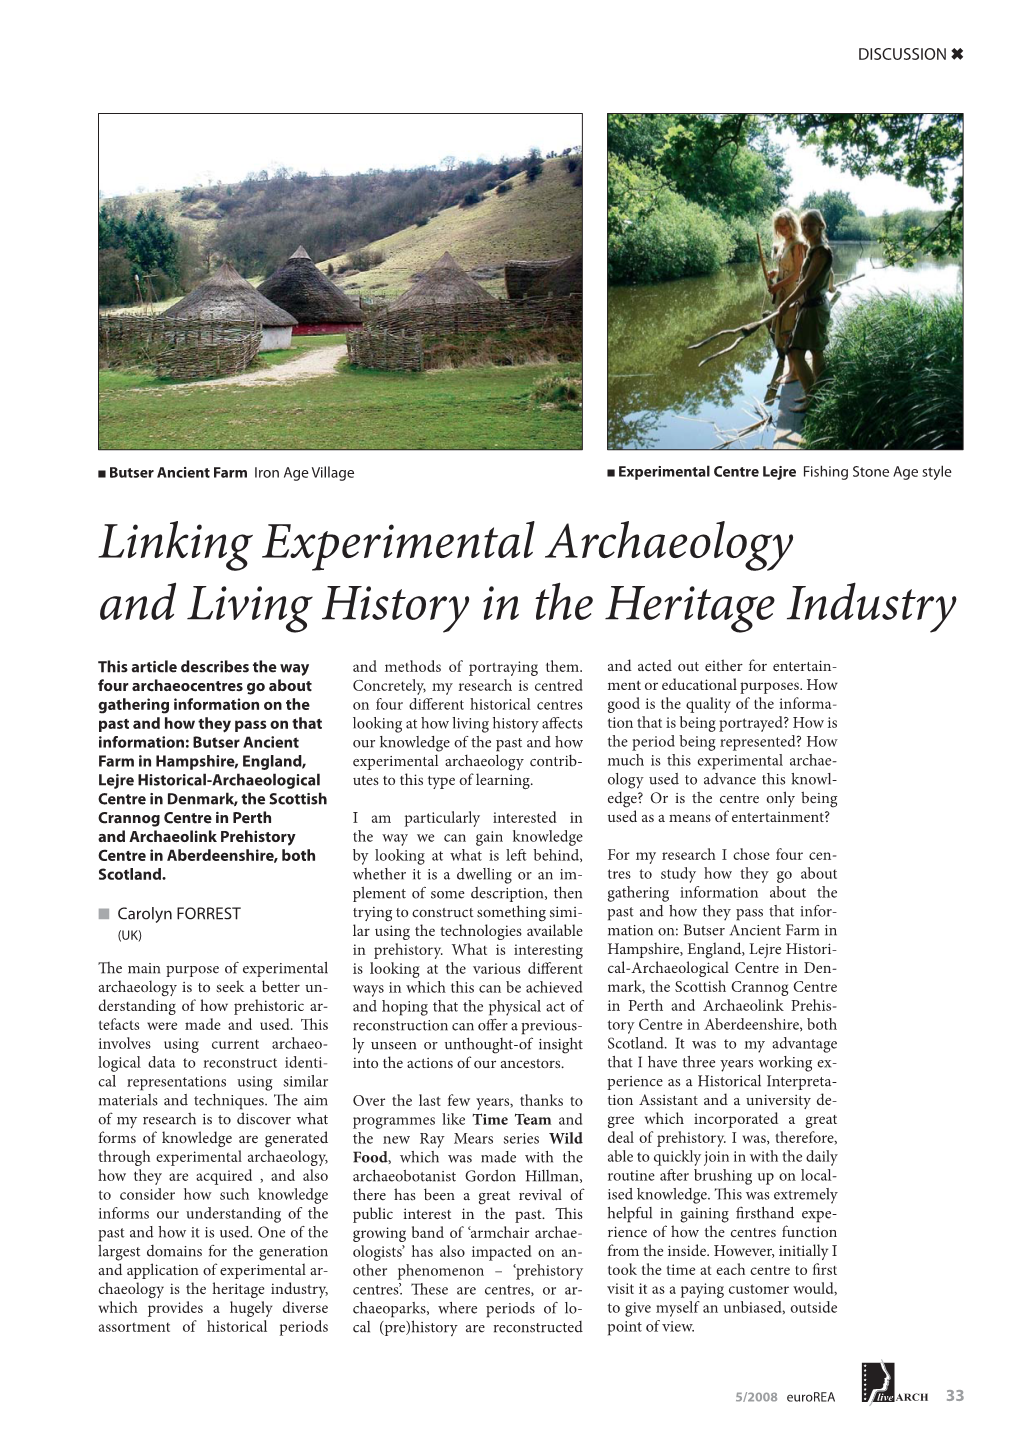 Linking Experimental Archaeology and Living History in the Heritage Industry